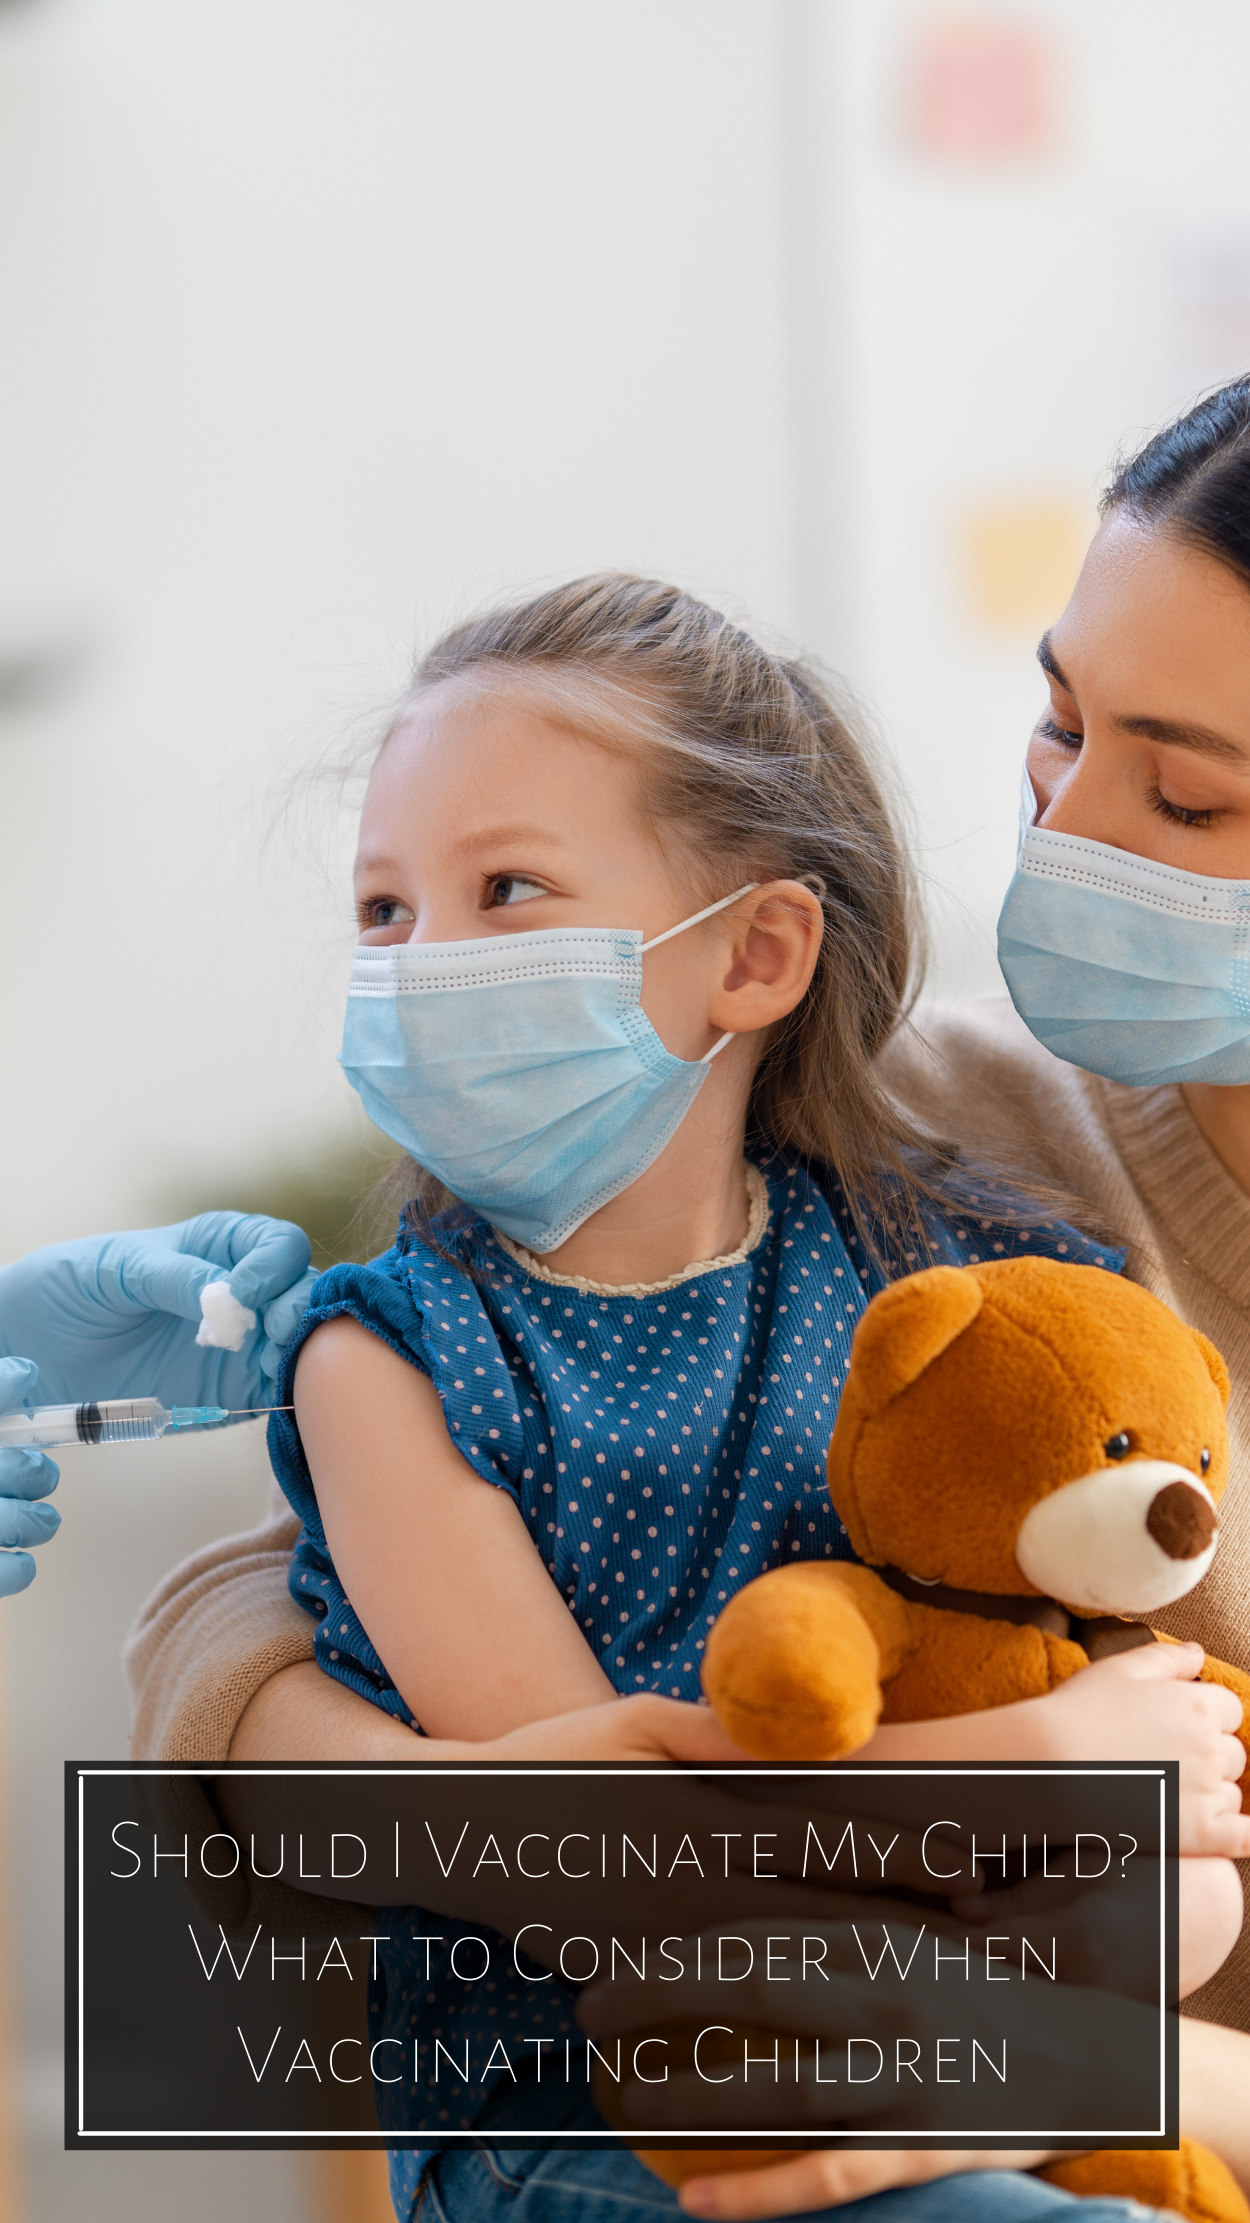 A child sits in a woman's lap lap holding a teddy bear while a doctor gives her a vaccine. The caption reads "Should I Vaccinate My Child? - What to Consider When Vaccinating Children"